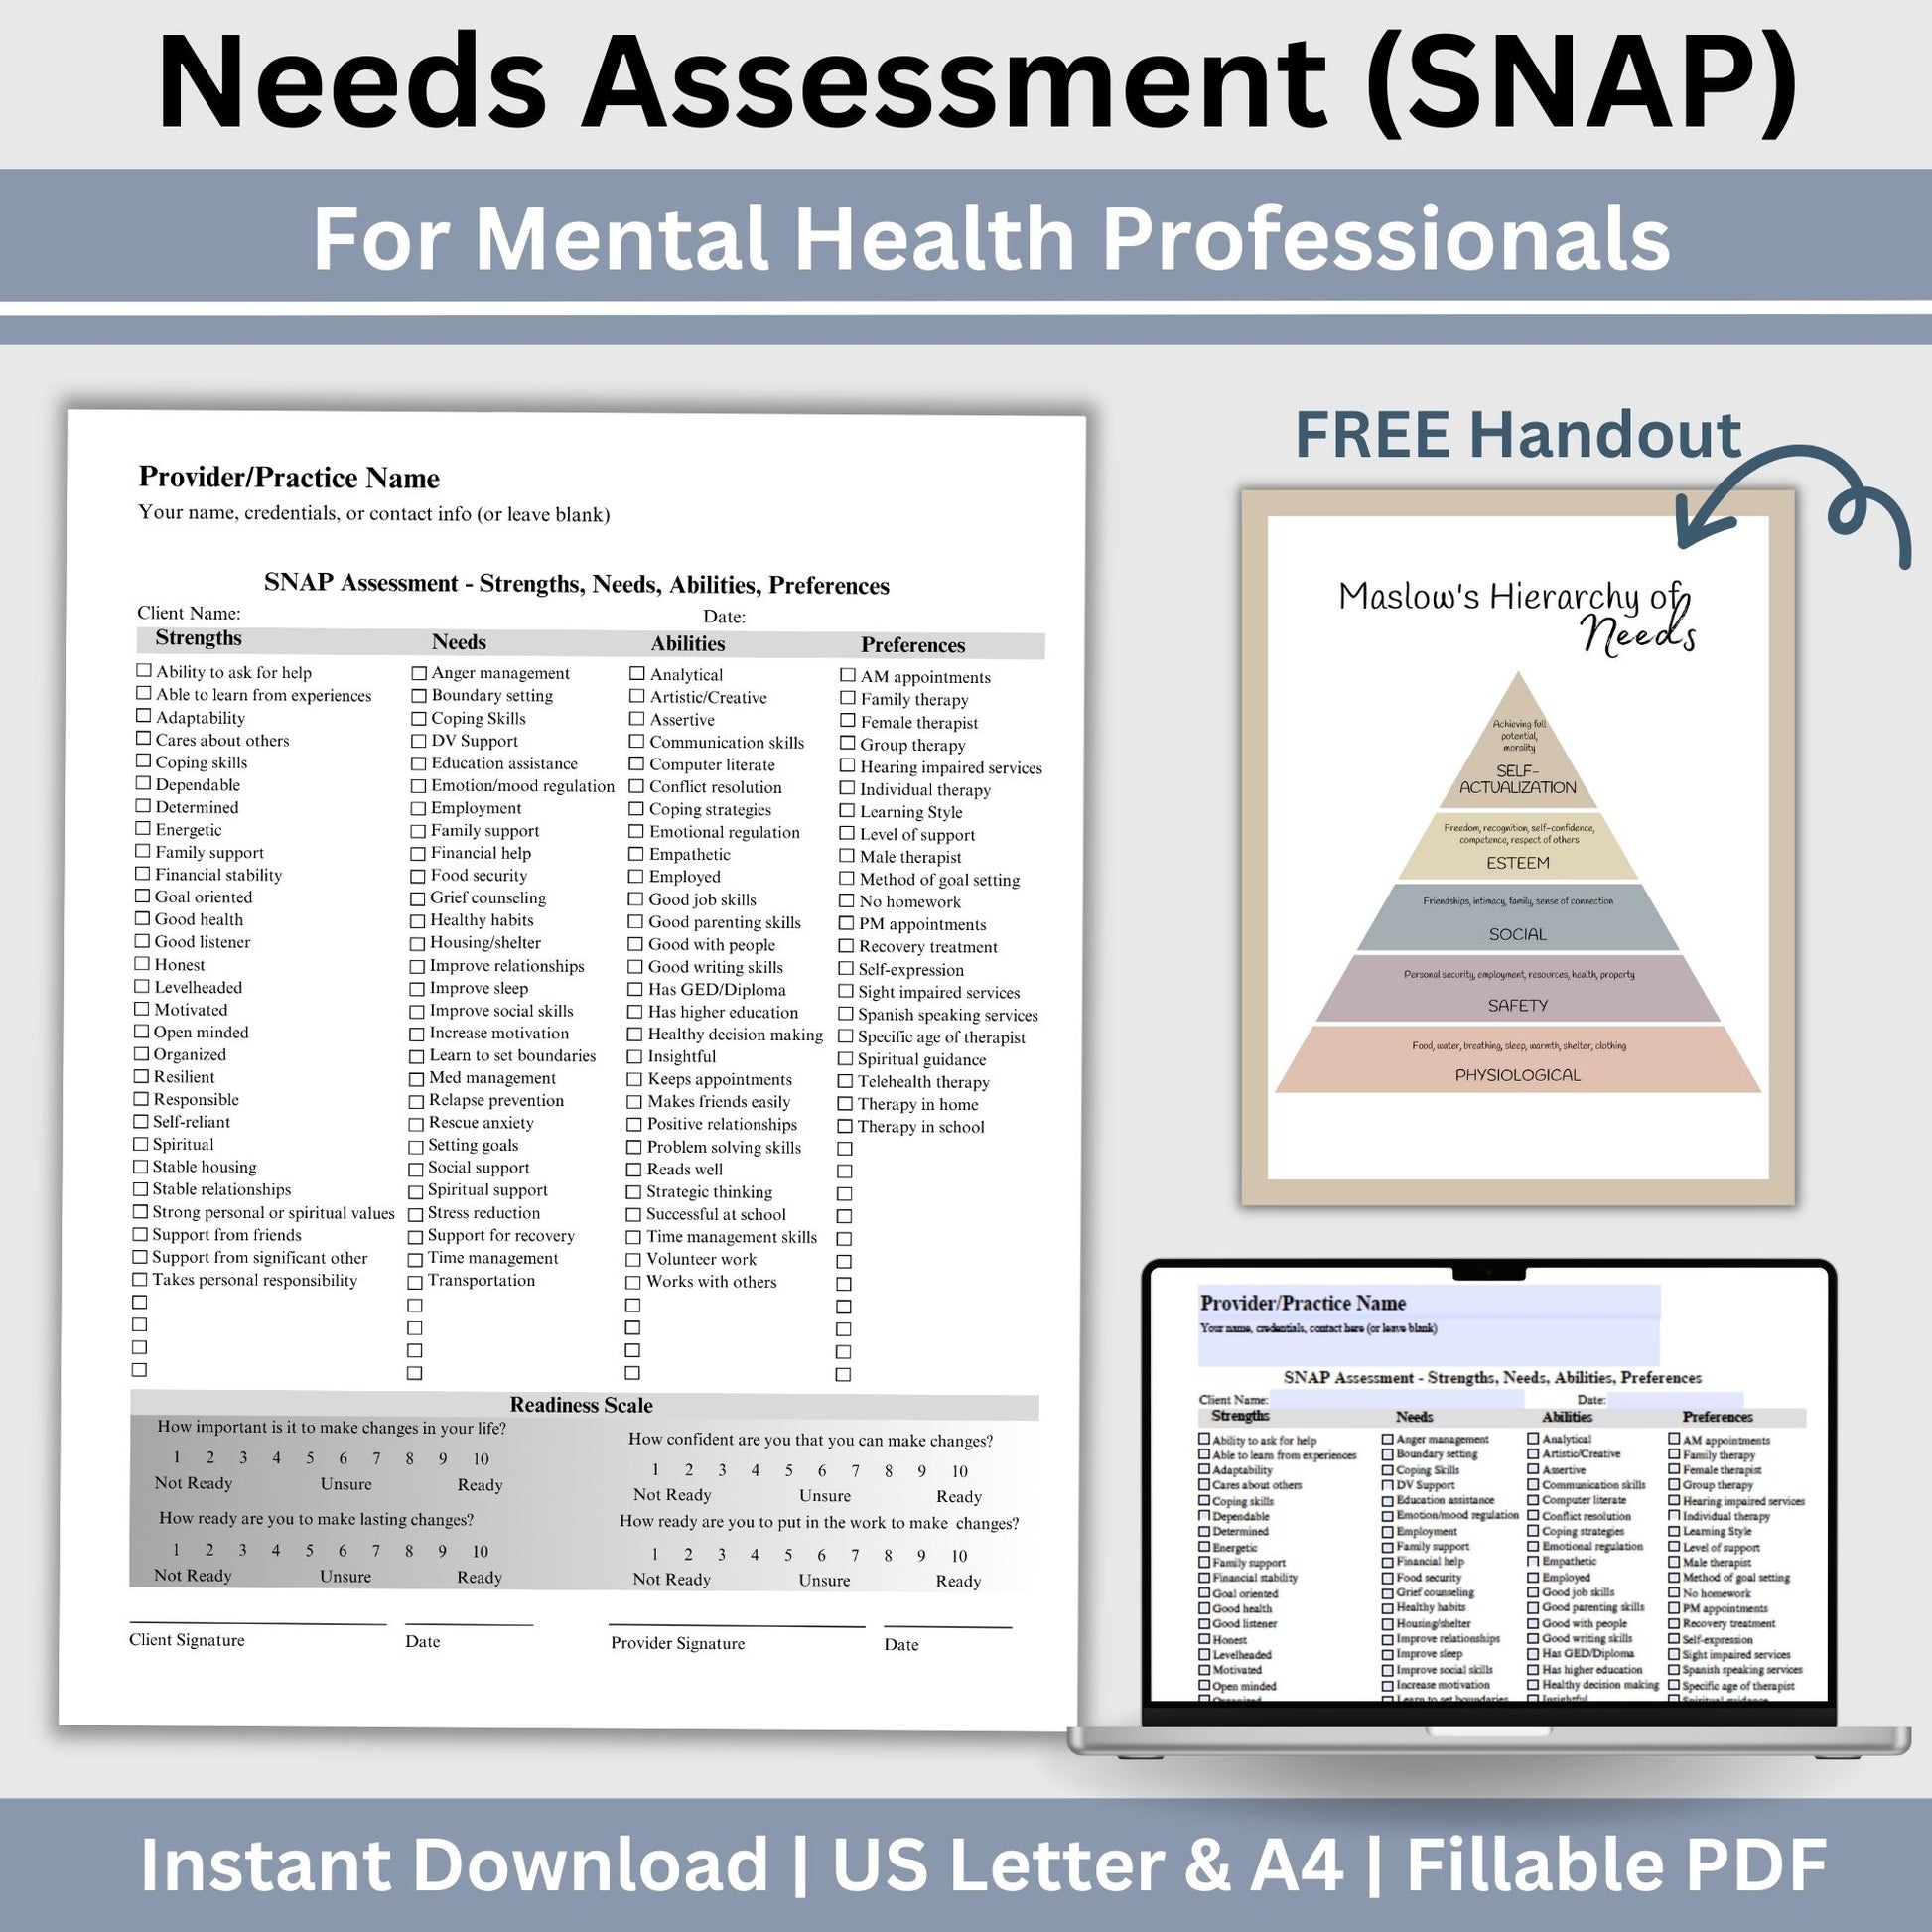 Needs Assessment (SNAP) to identify strengths, needs, abilities and preferences.  Perfect for social workers, school counselors and therapist office.  Free Maslows Hierarchy of Needs therapy poster